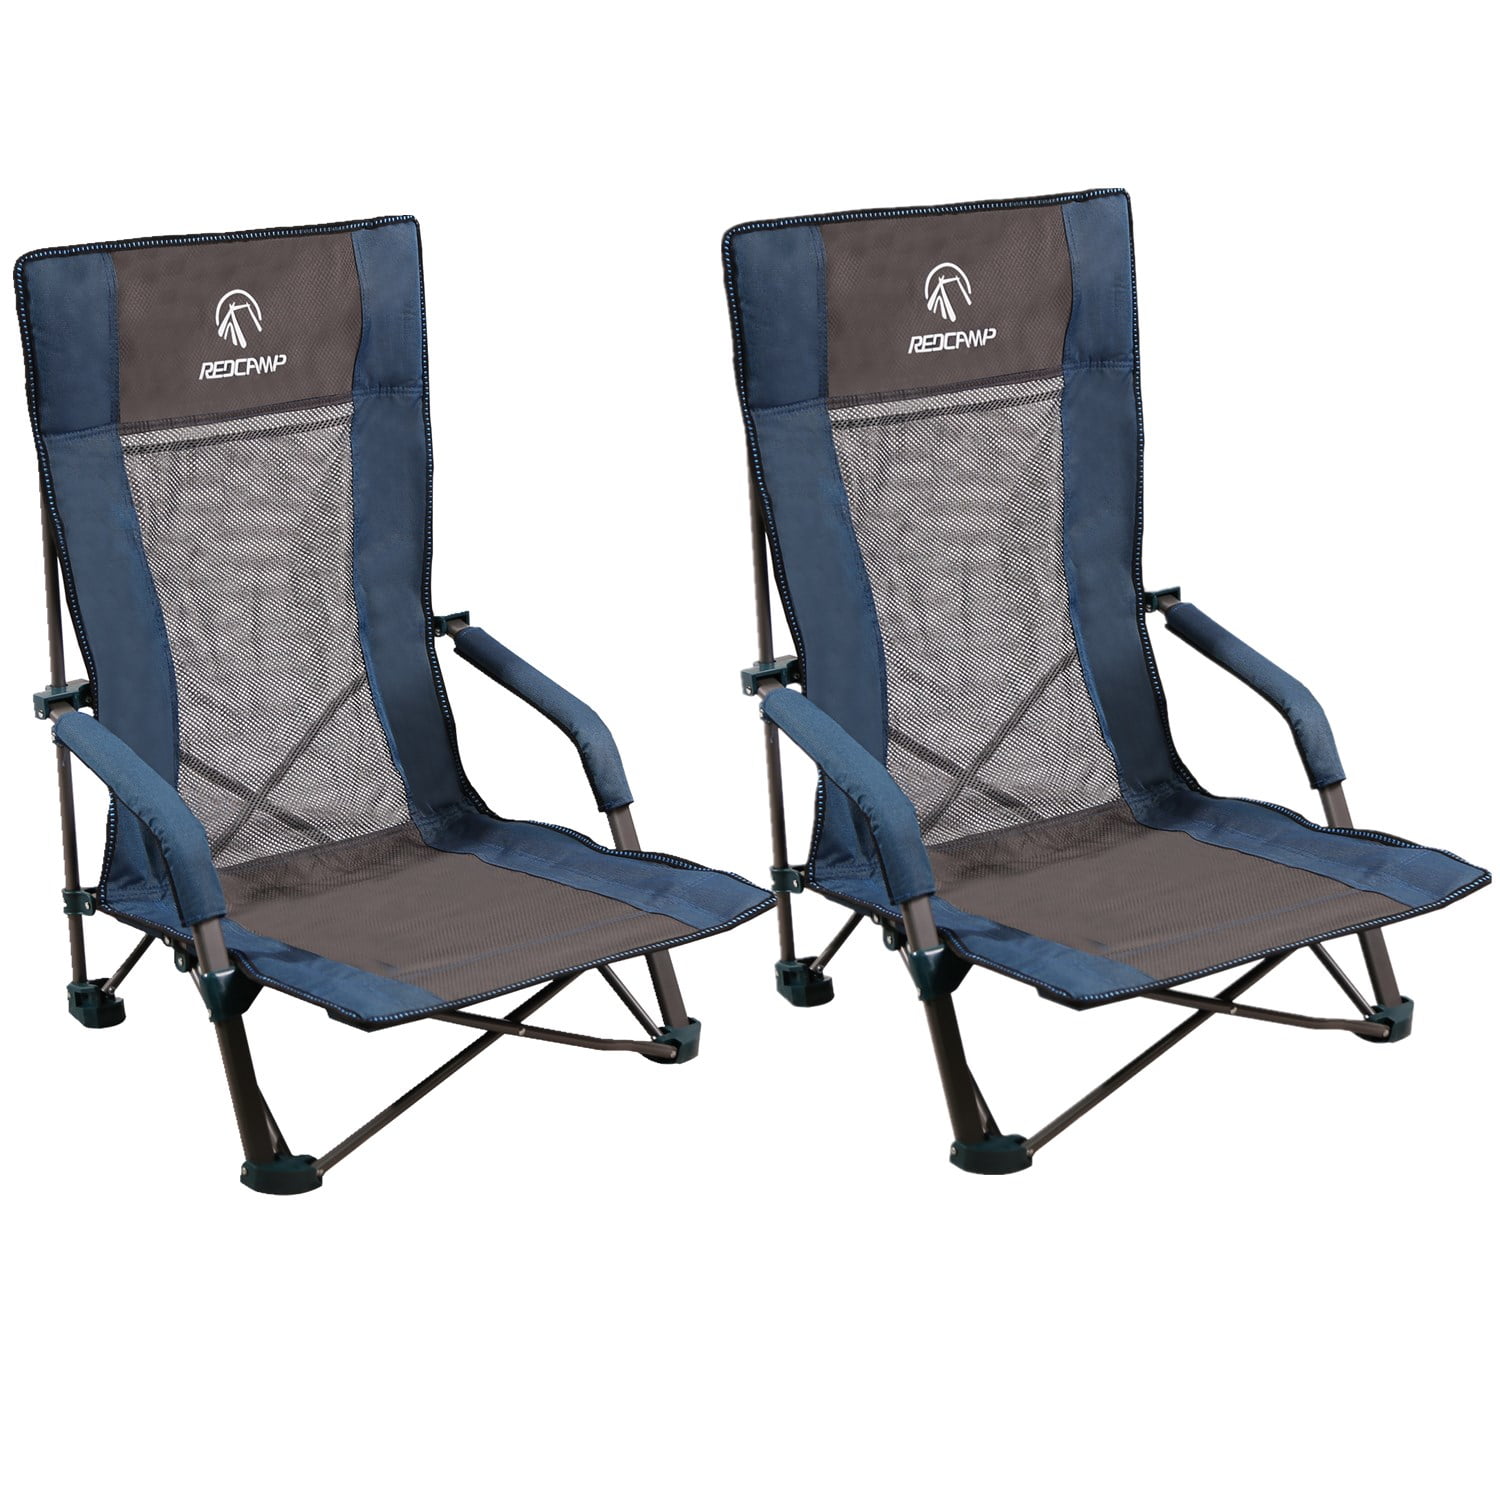 REDCAMP 2 Packs Low Beach Chair Folding Lightweight with ...